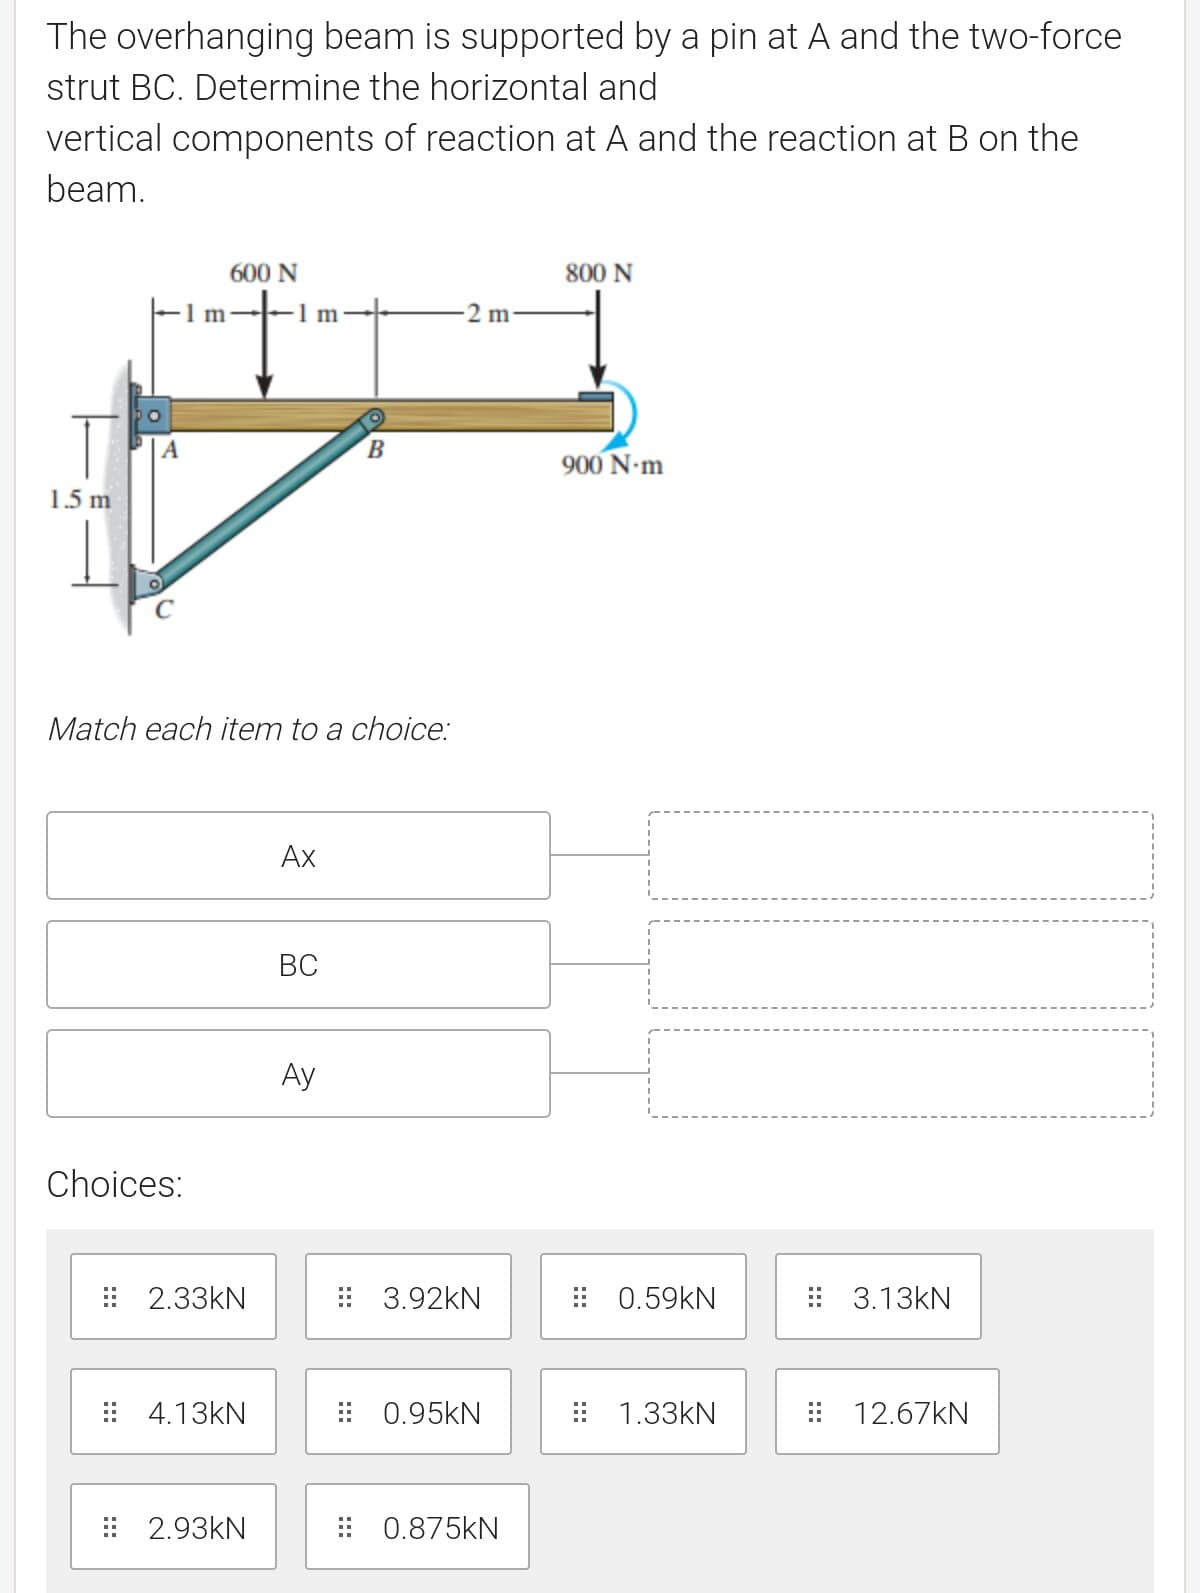 The overhanging beam is supported by a pin at A and the two-force
strut BC. Determine the horizontal and
vertical components of reaction at A and the reaction at B on the
beam.
600 N
800 N
1m
2 m-
A
B.
900 N-m
1.5 m
Match each item to a choice:
Ах
ВС
Ay
Choices:
: 2.33KN
E 3.92kN
0.59KN
: 3.13KN
: 4.13KN
: 0.95KN
1.33KN
: 12.67KN
: 2.93KN
0.875KN
